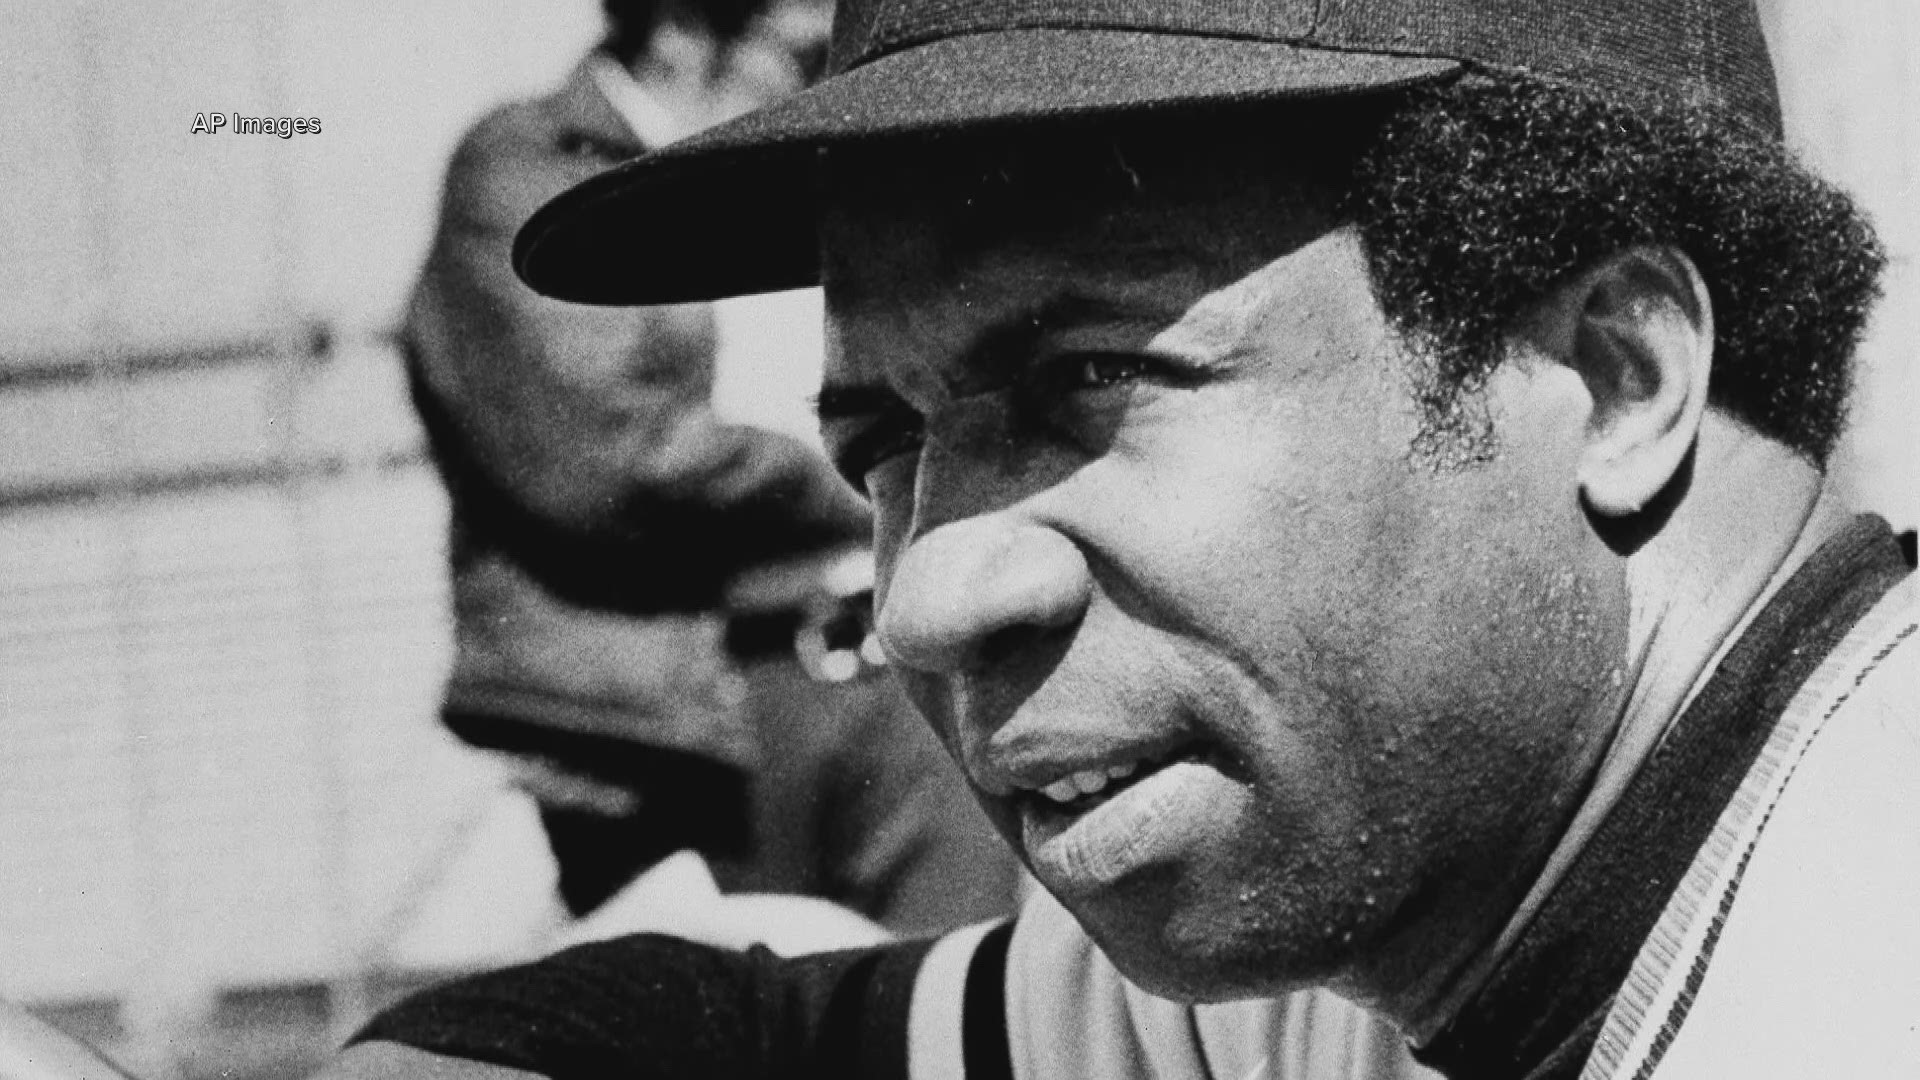 Baseball Hall of Famer and Orioles Great Frank Robinson, Dead at 83